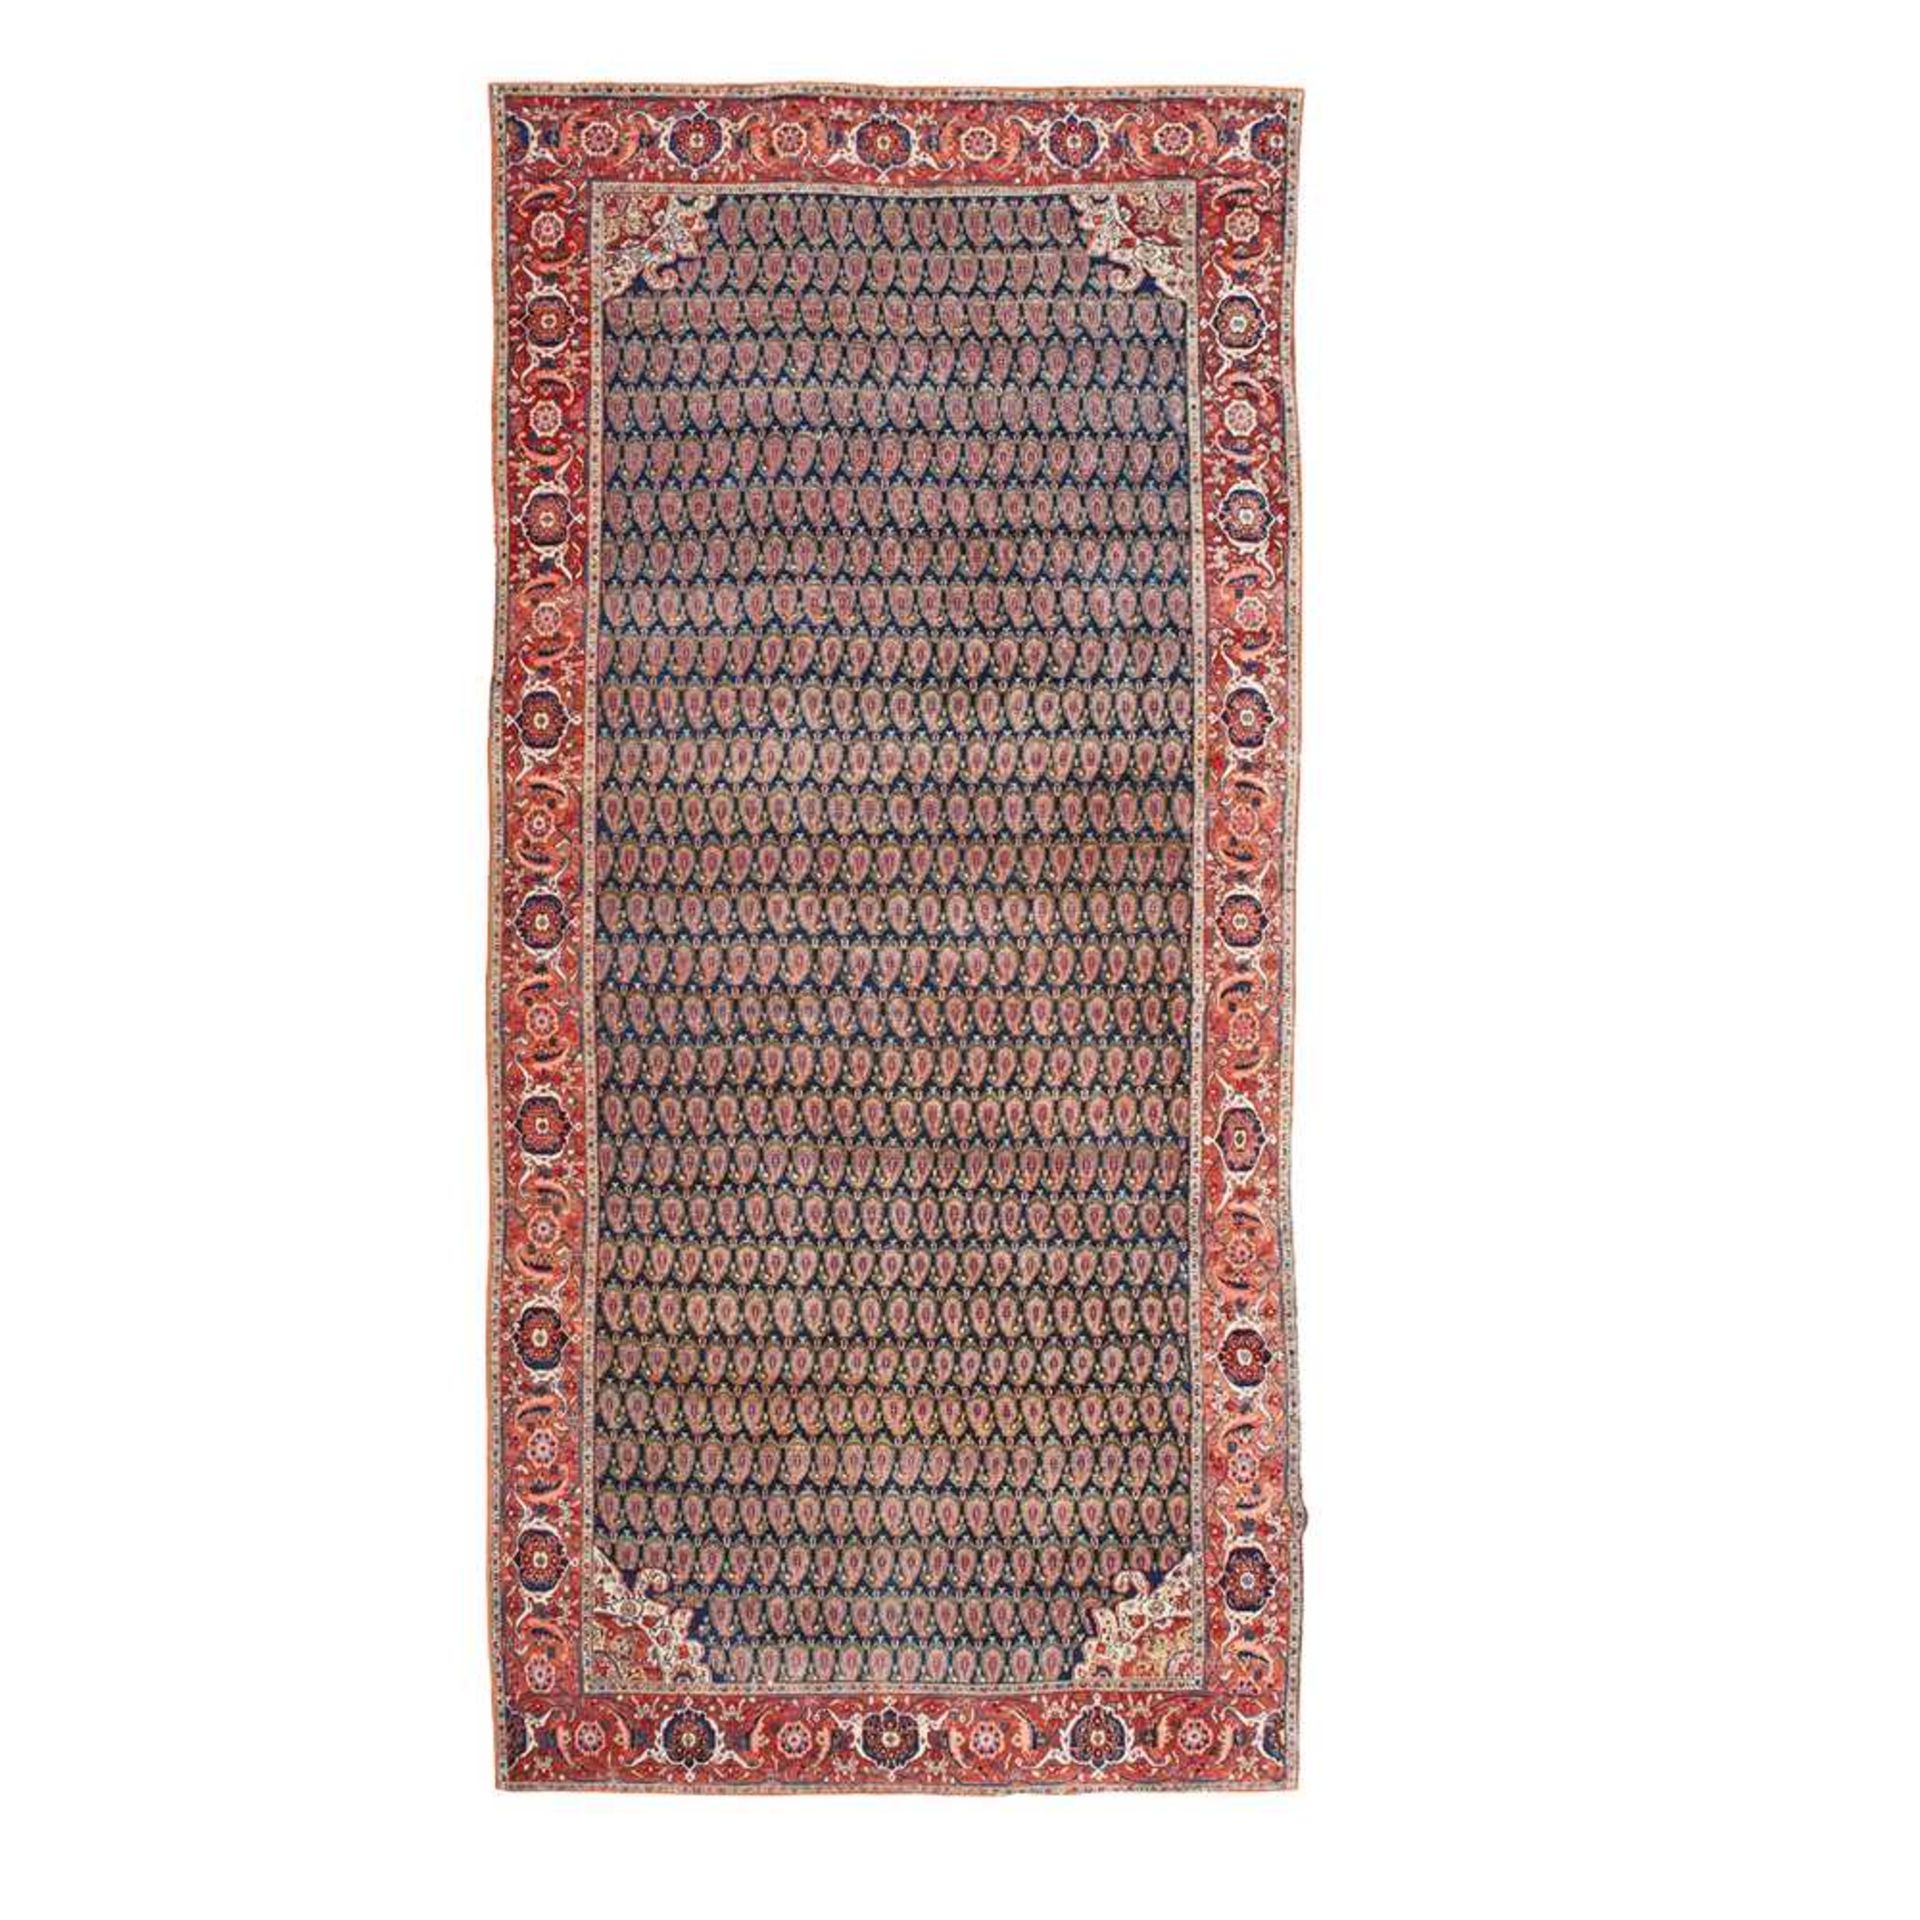 LARGE BAKHTIARI CARPET WEST PERSIA, LATE 19TH/EARLY 20TH CENTURY